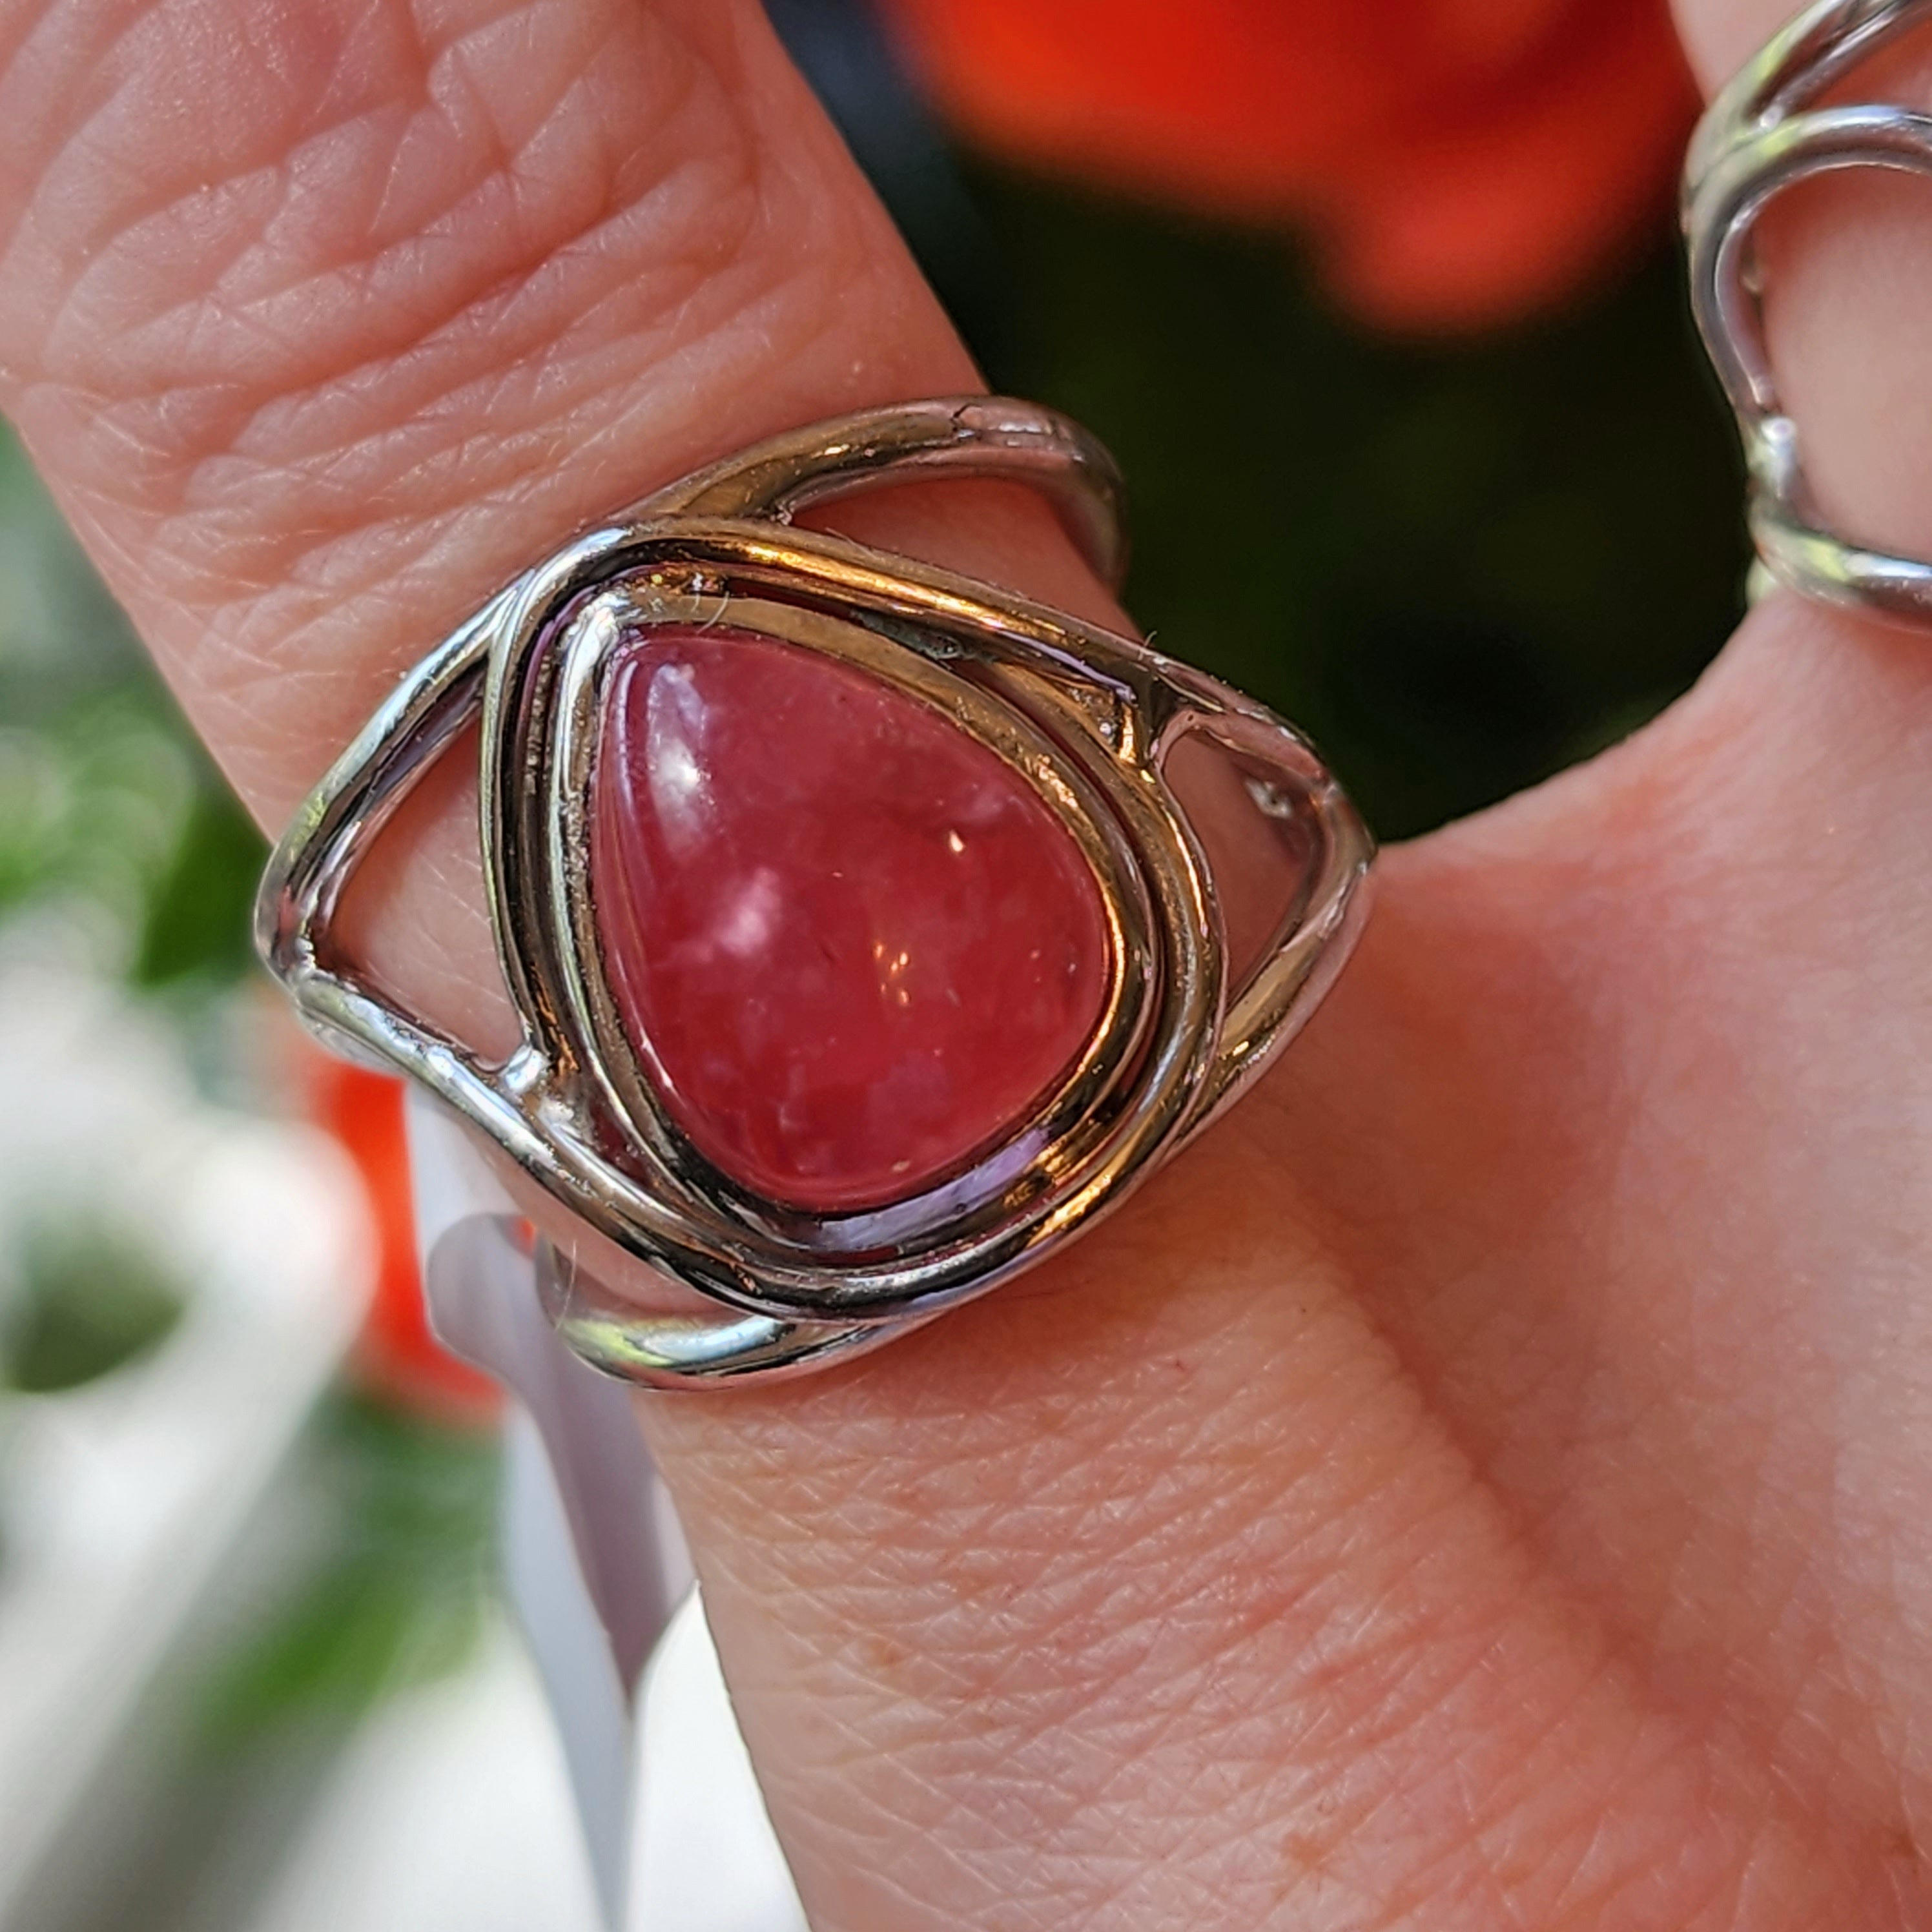 Gel Rhodochrosite Finger Cuff Adjustable Ring .925 Silver for Emotional Healing, Loving Yourself and Following your Heart